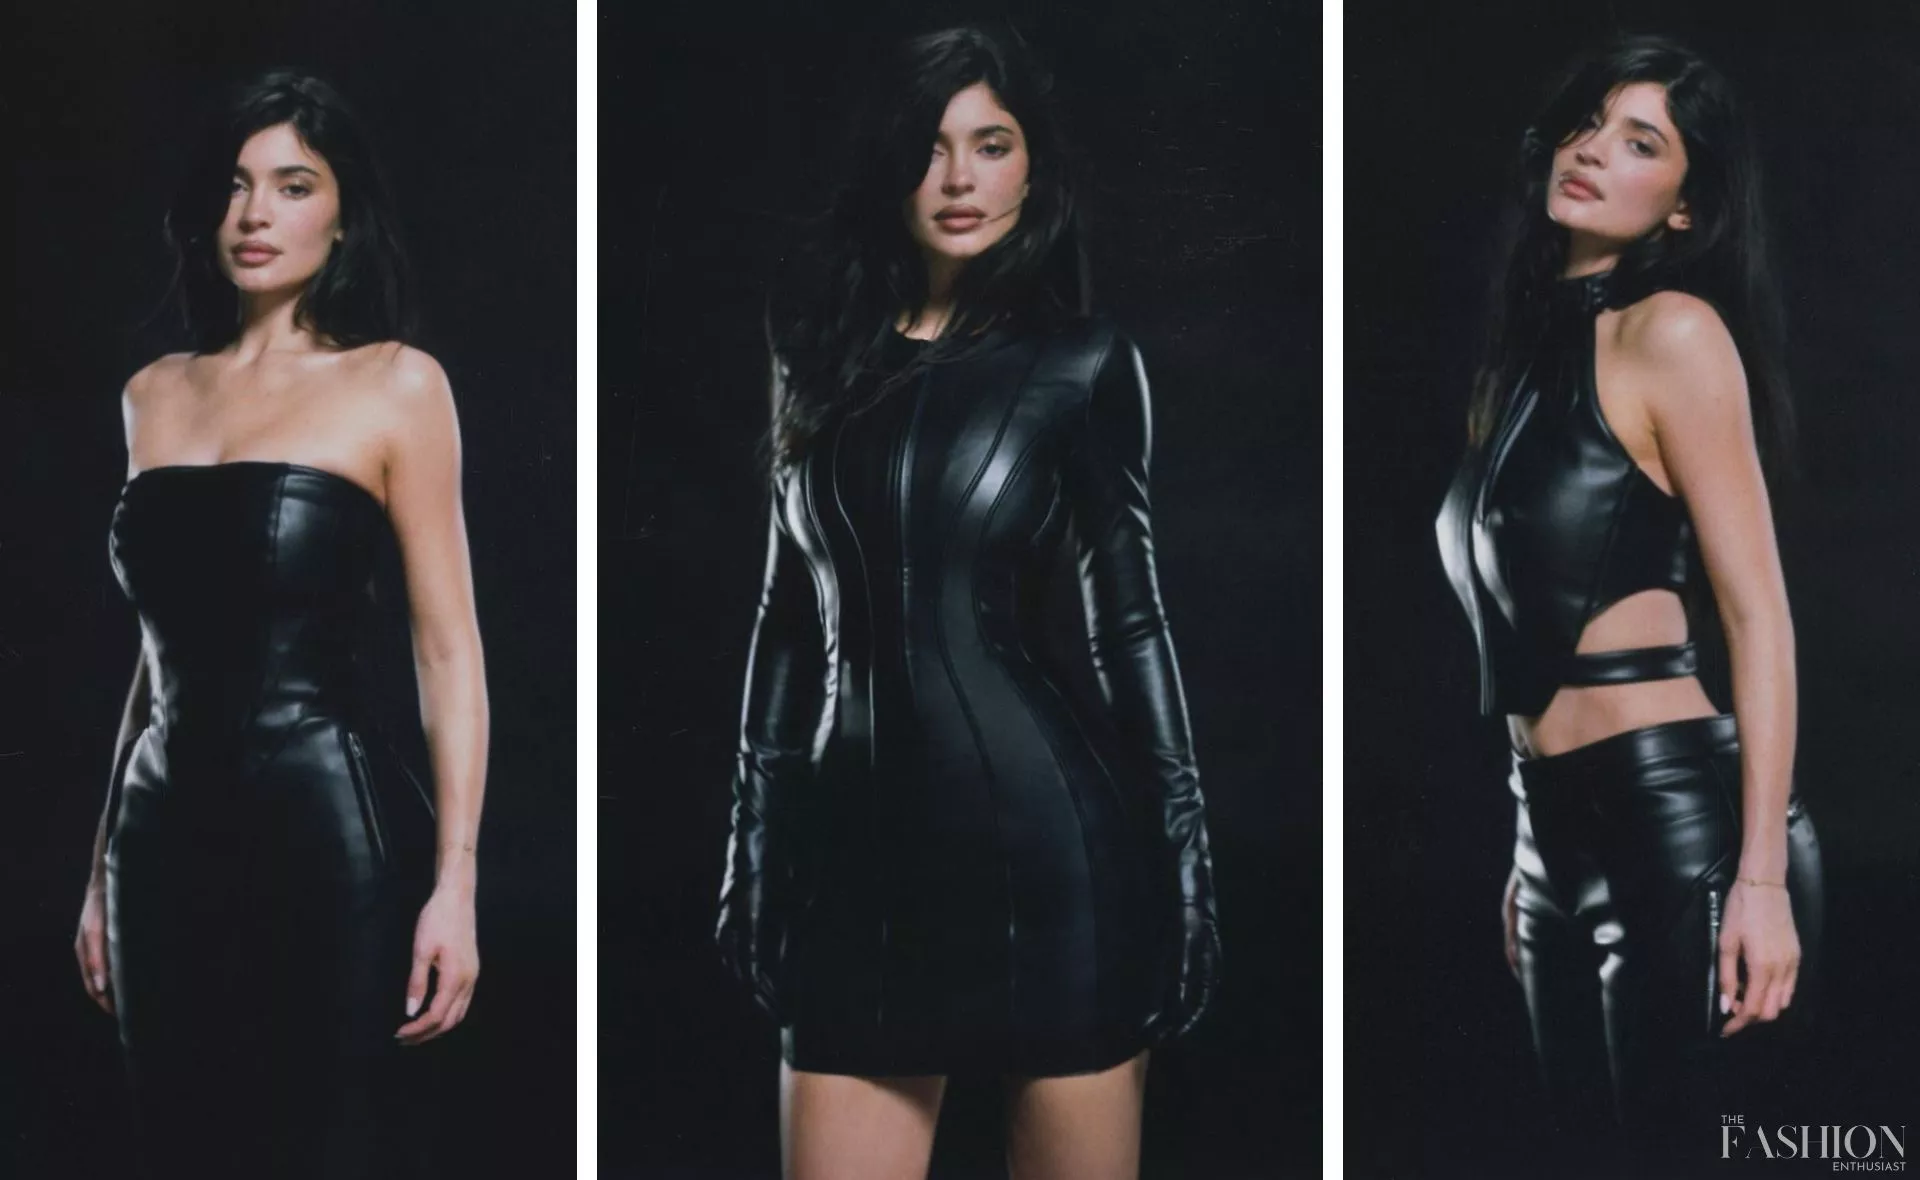 Kylie Jenner Clothing Line: Meet Khy!